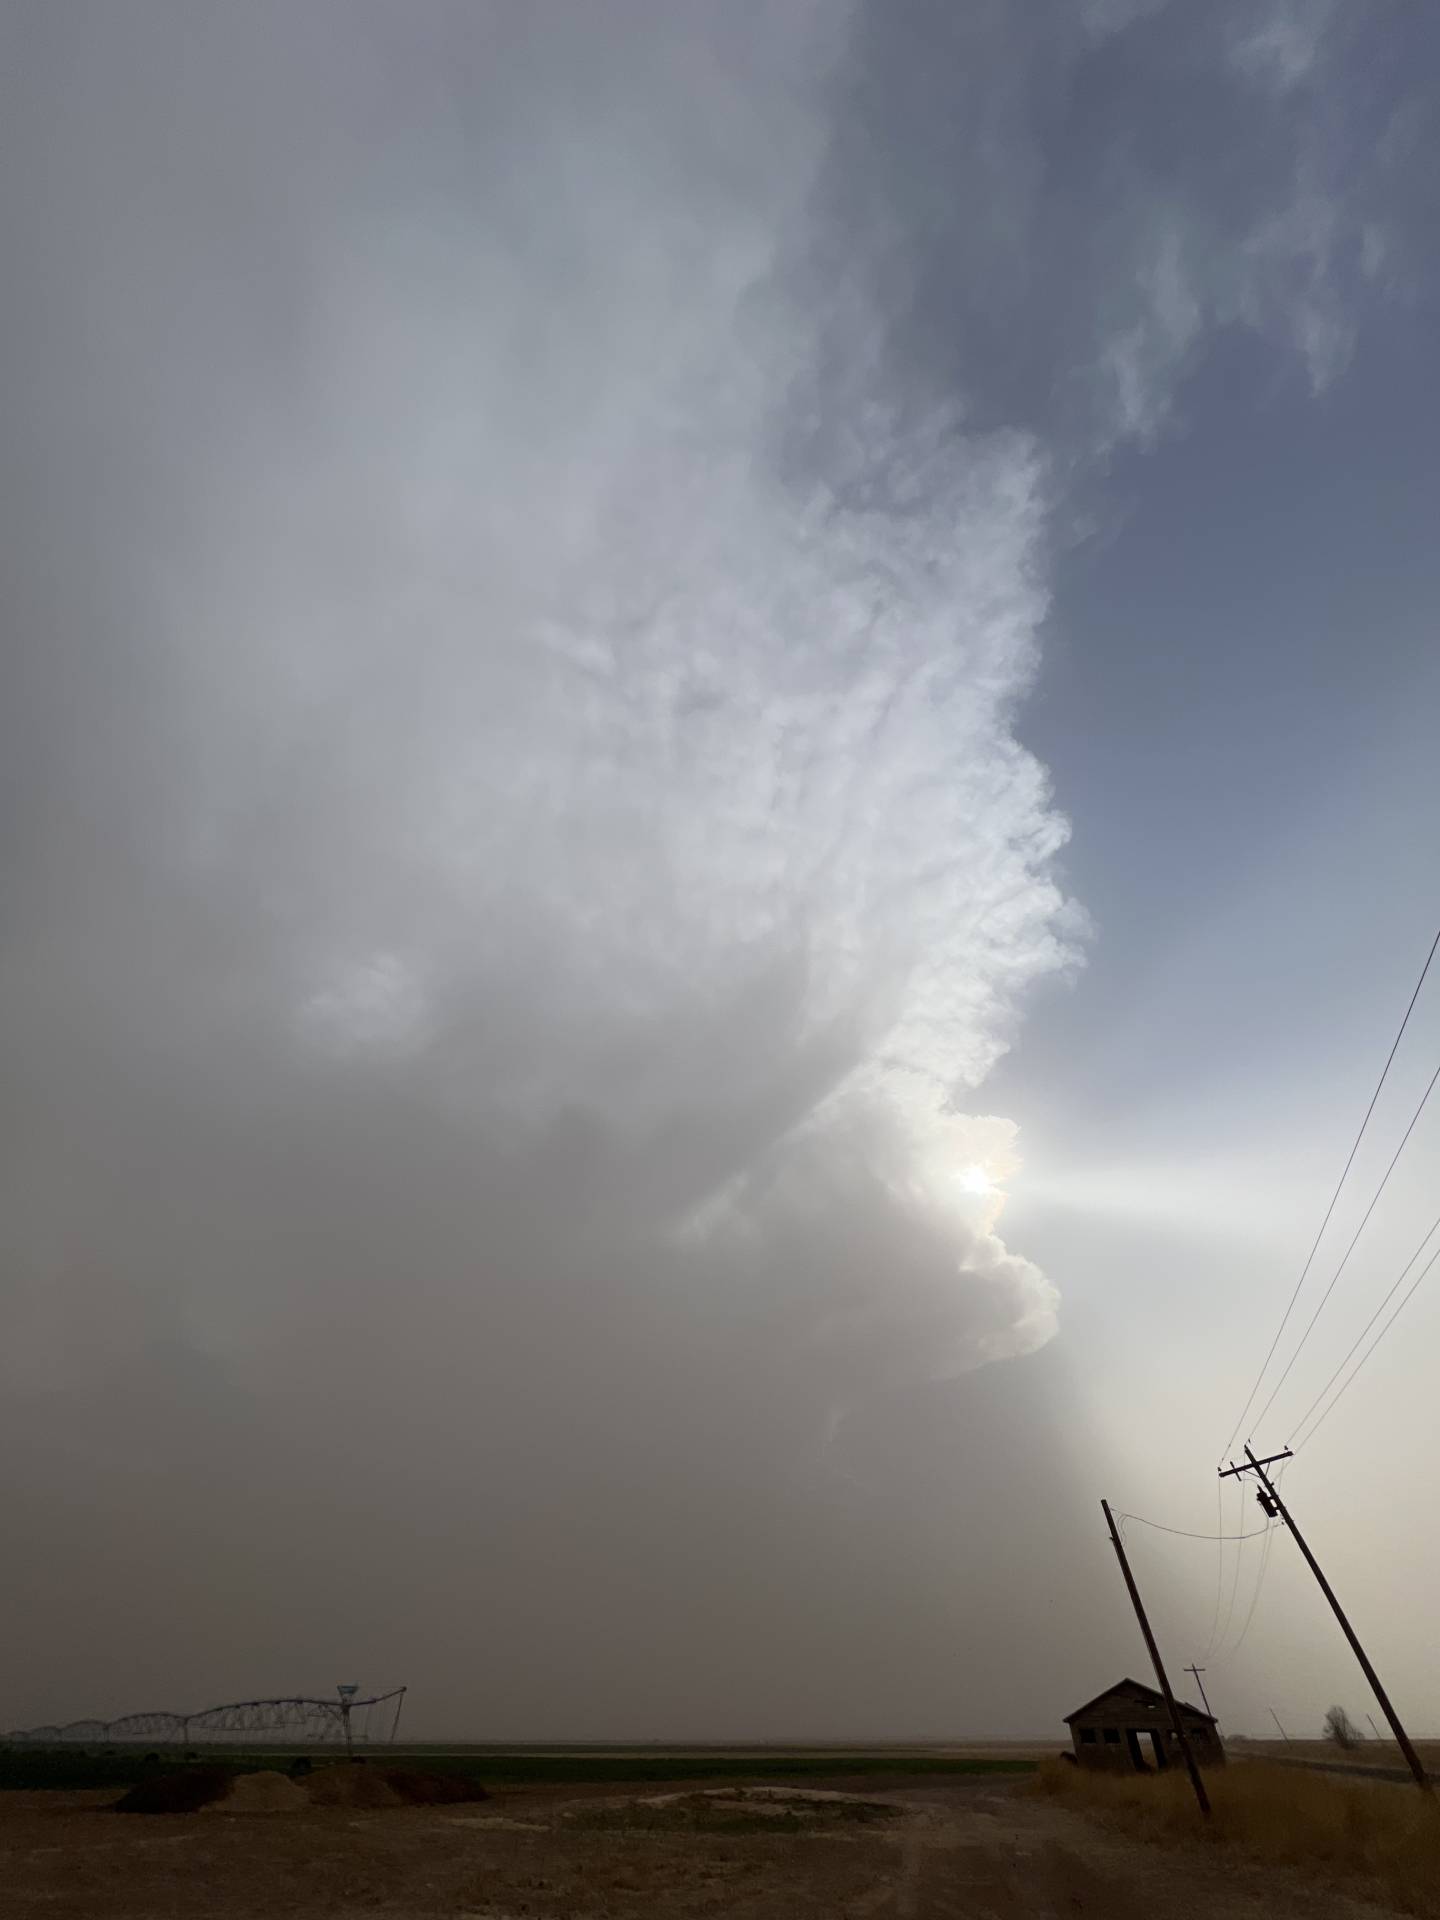 From the dust storm of #Texas #txwx 06:03 PM